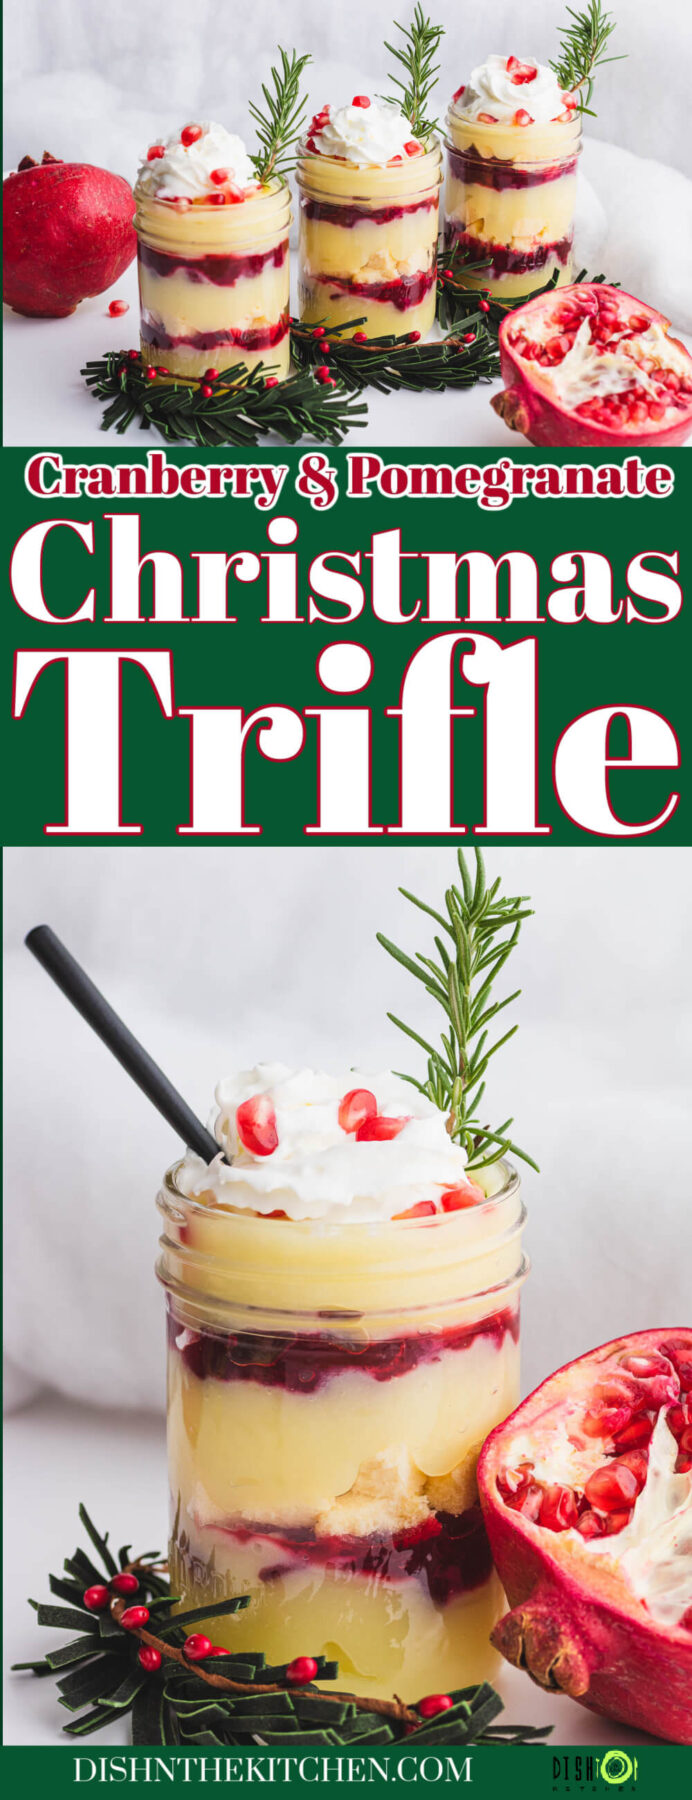 Pinterest image featuring glass half pint jars filled with a layered Christmas Trifle garnished with whipped cream, pomegranate seeds, and fresh rosemary.